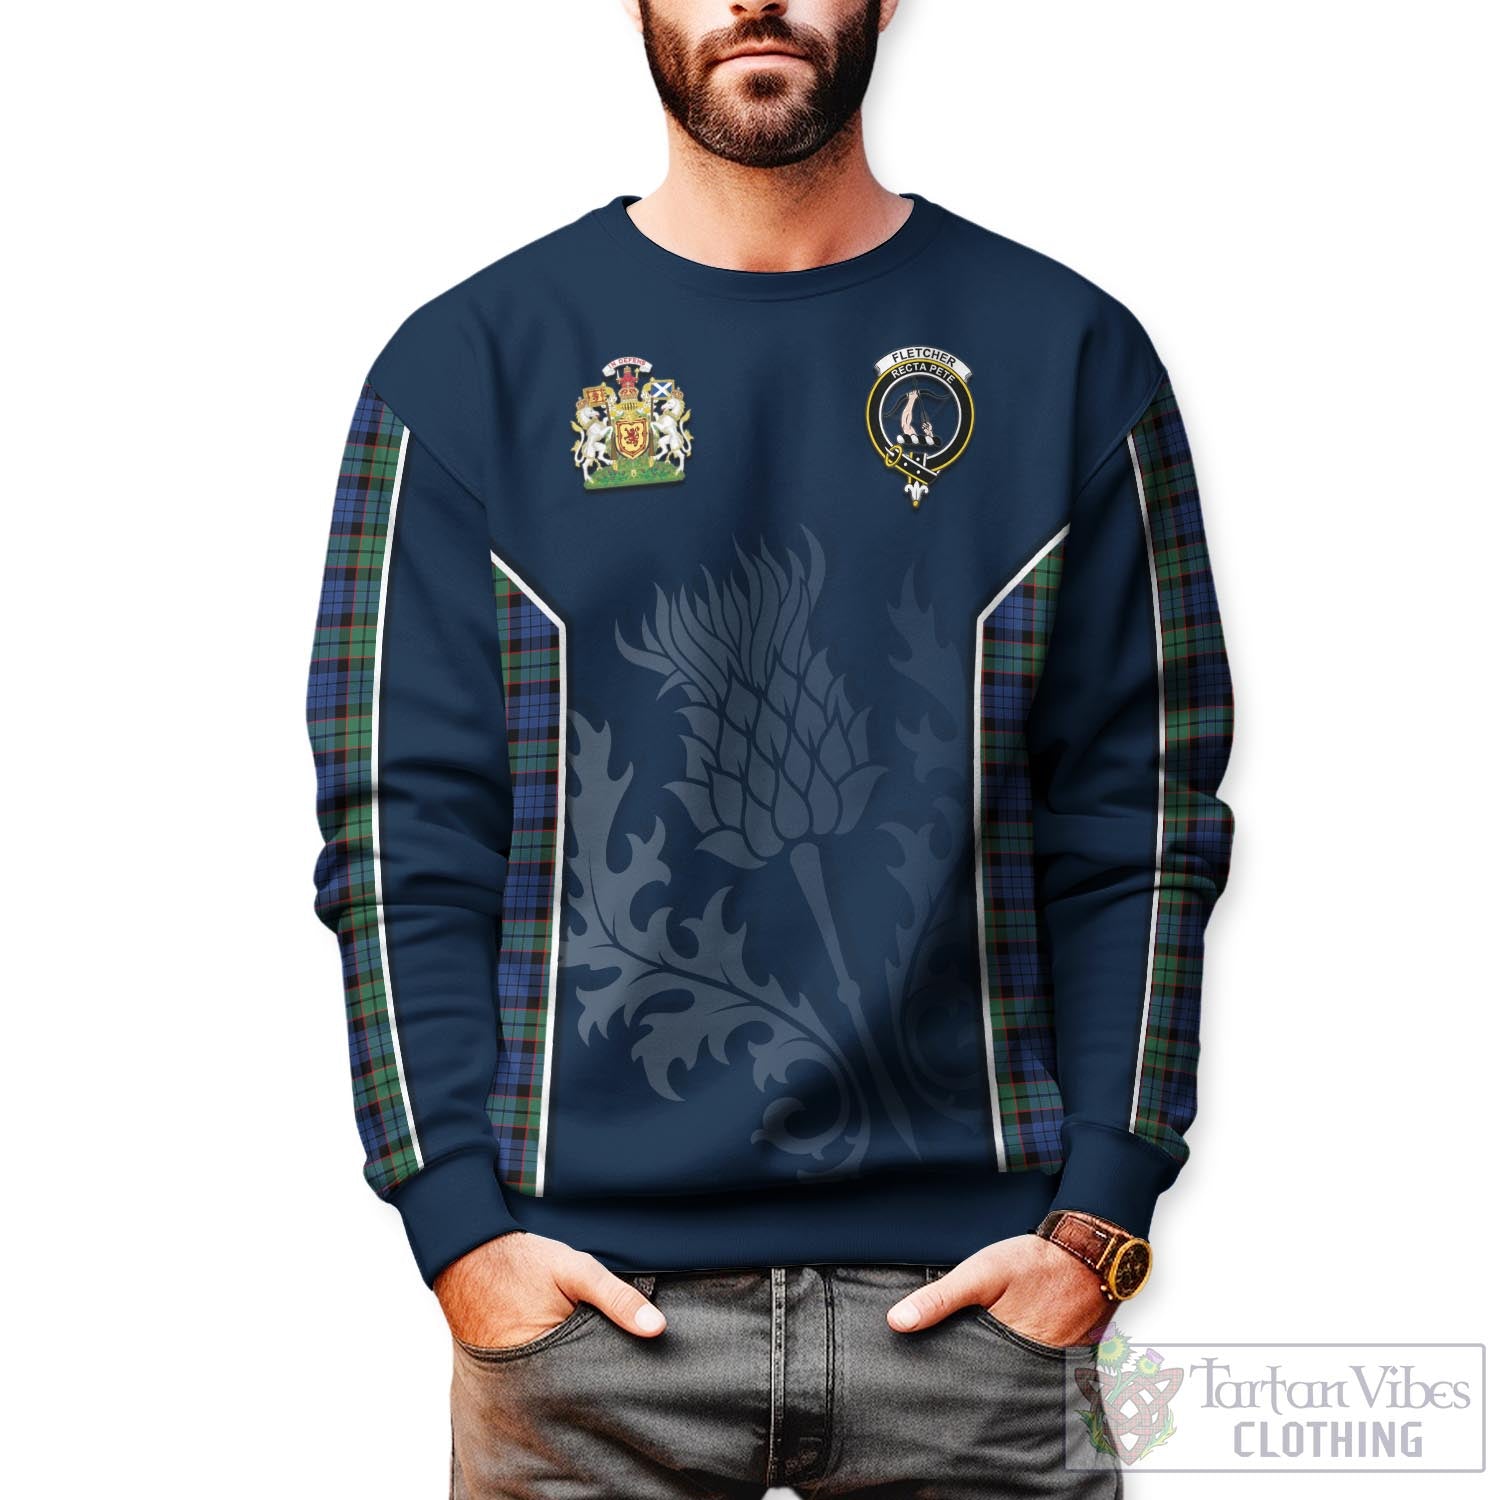 Tartan Vibes Clothing Fletcher Ancient Tartan Sweatshirt with Family Crest and Scottish Thistle Vibes Sport Style